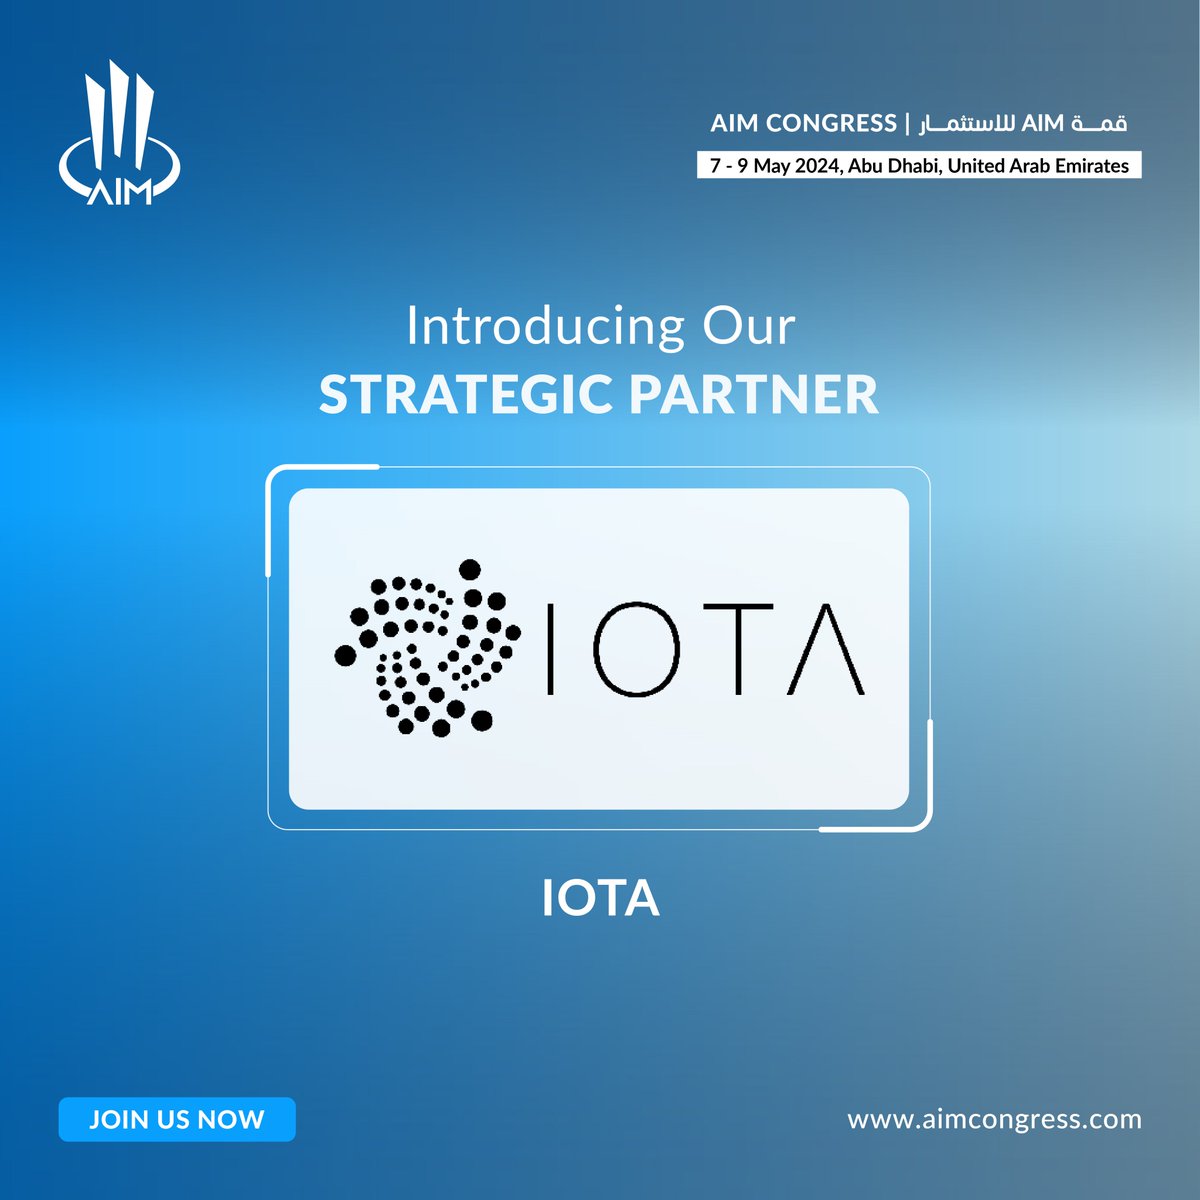 AIM Congress 2024 proudly introduces @iota as our Strategic Partner!

Discover how IOTA's groundbreaking technology is driving the future of smart cities and digital transactions.

#AIMCongress2024 #IOTATechnology #DigitalFuture #StrategicInnovation